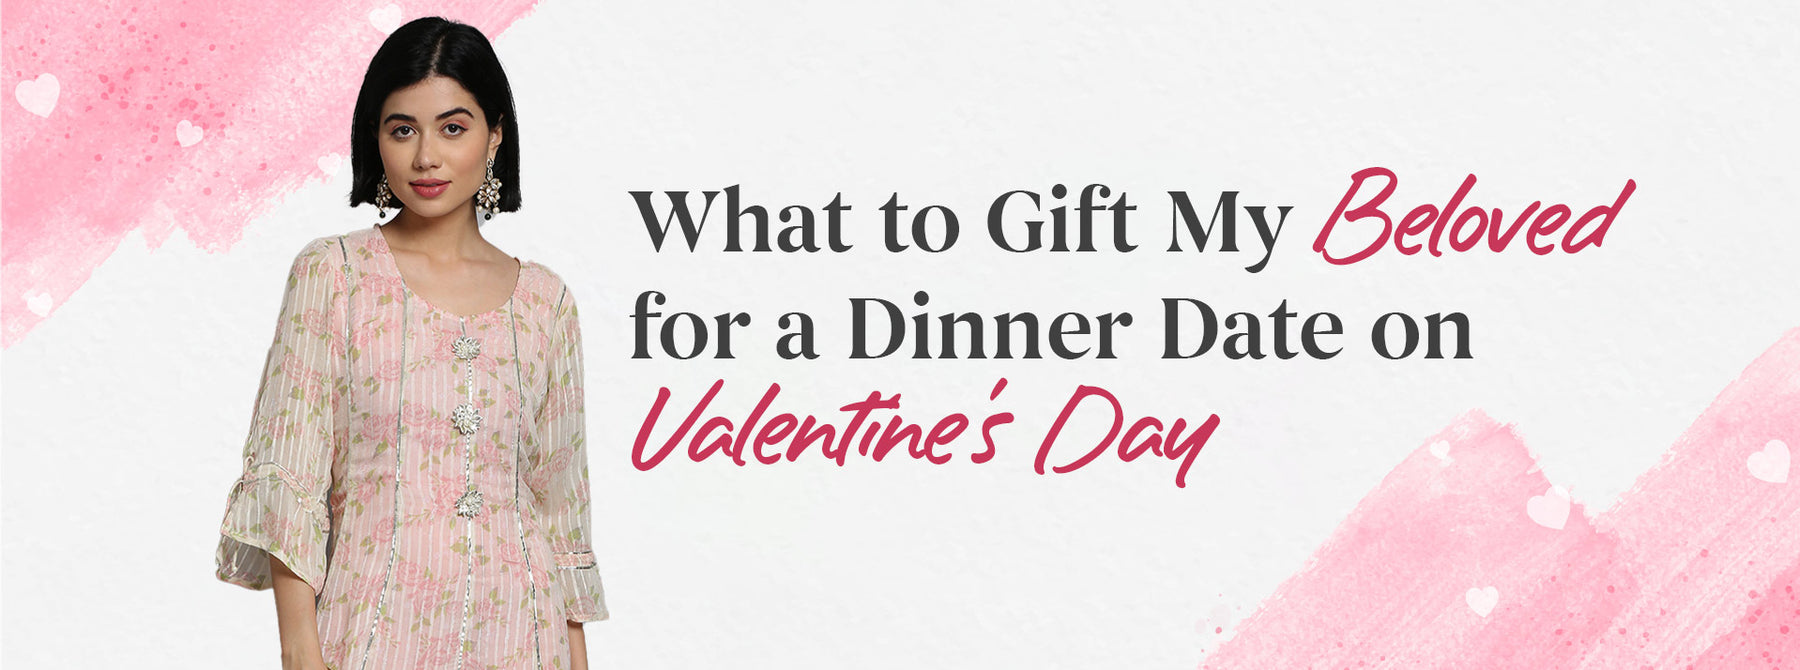 What to Gift My Beloved for a Dinner Date on Valentine’s Day?